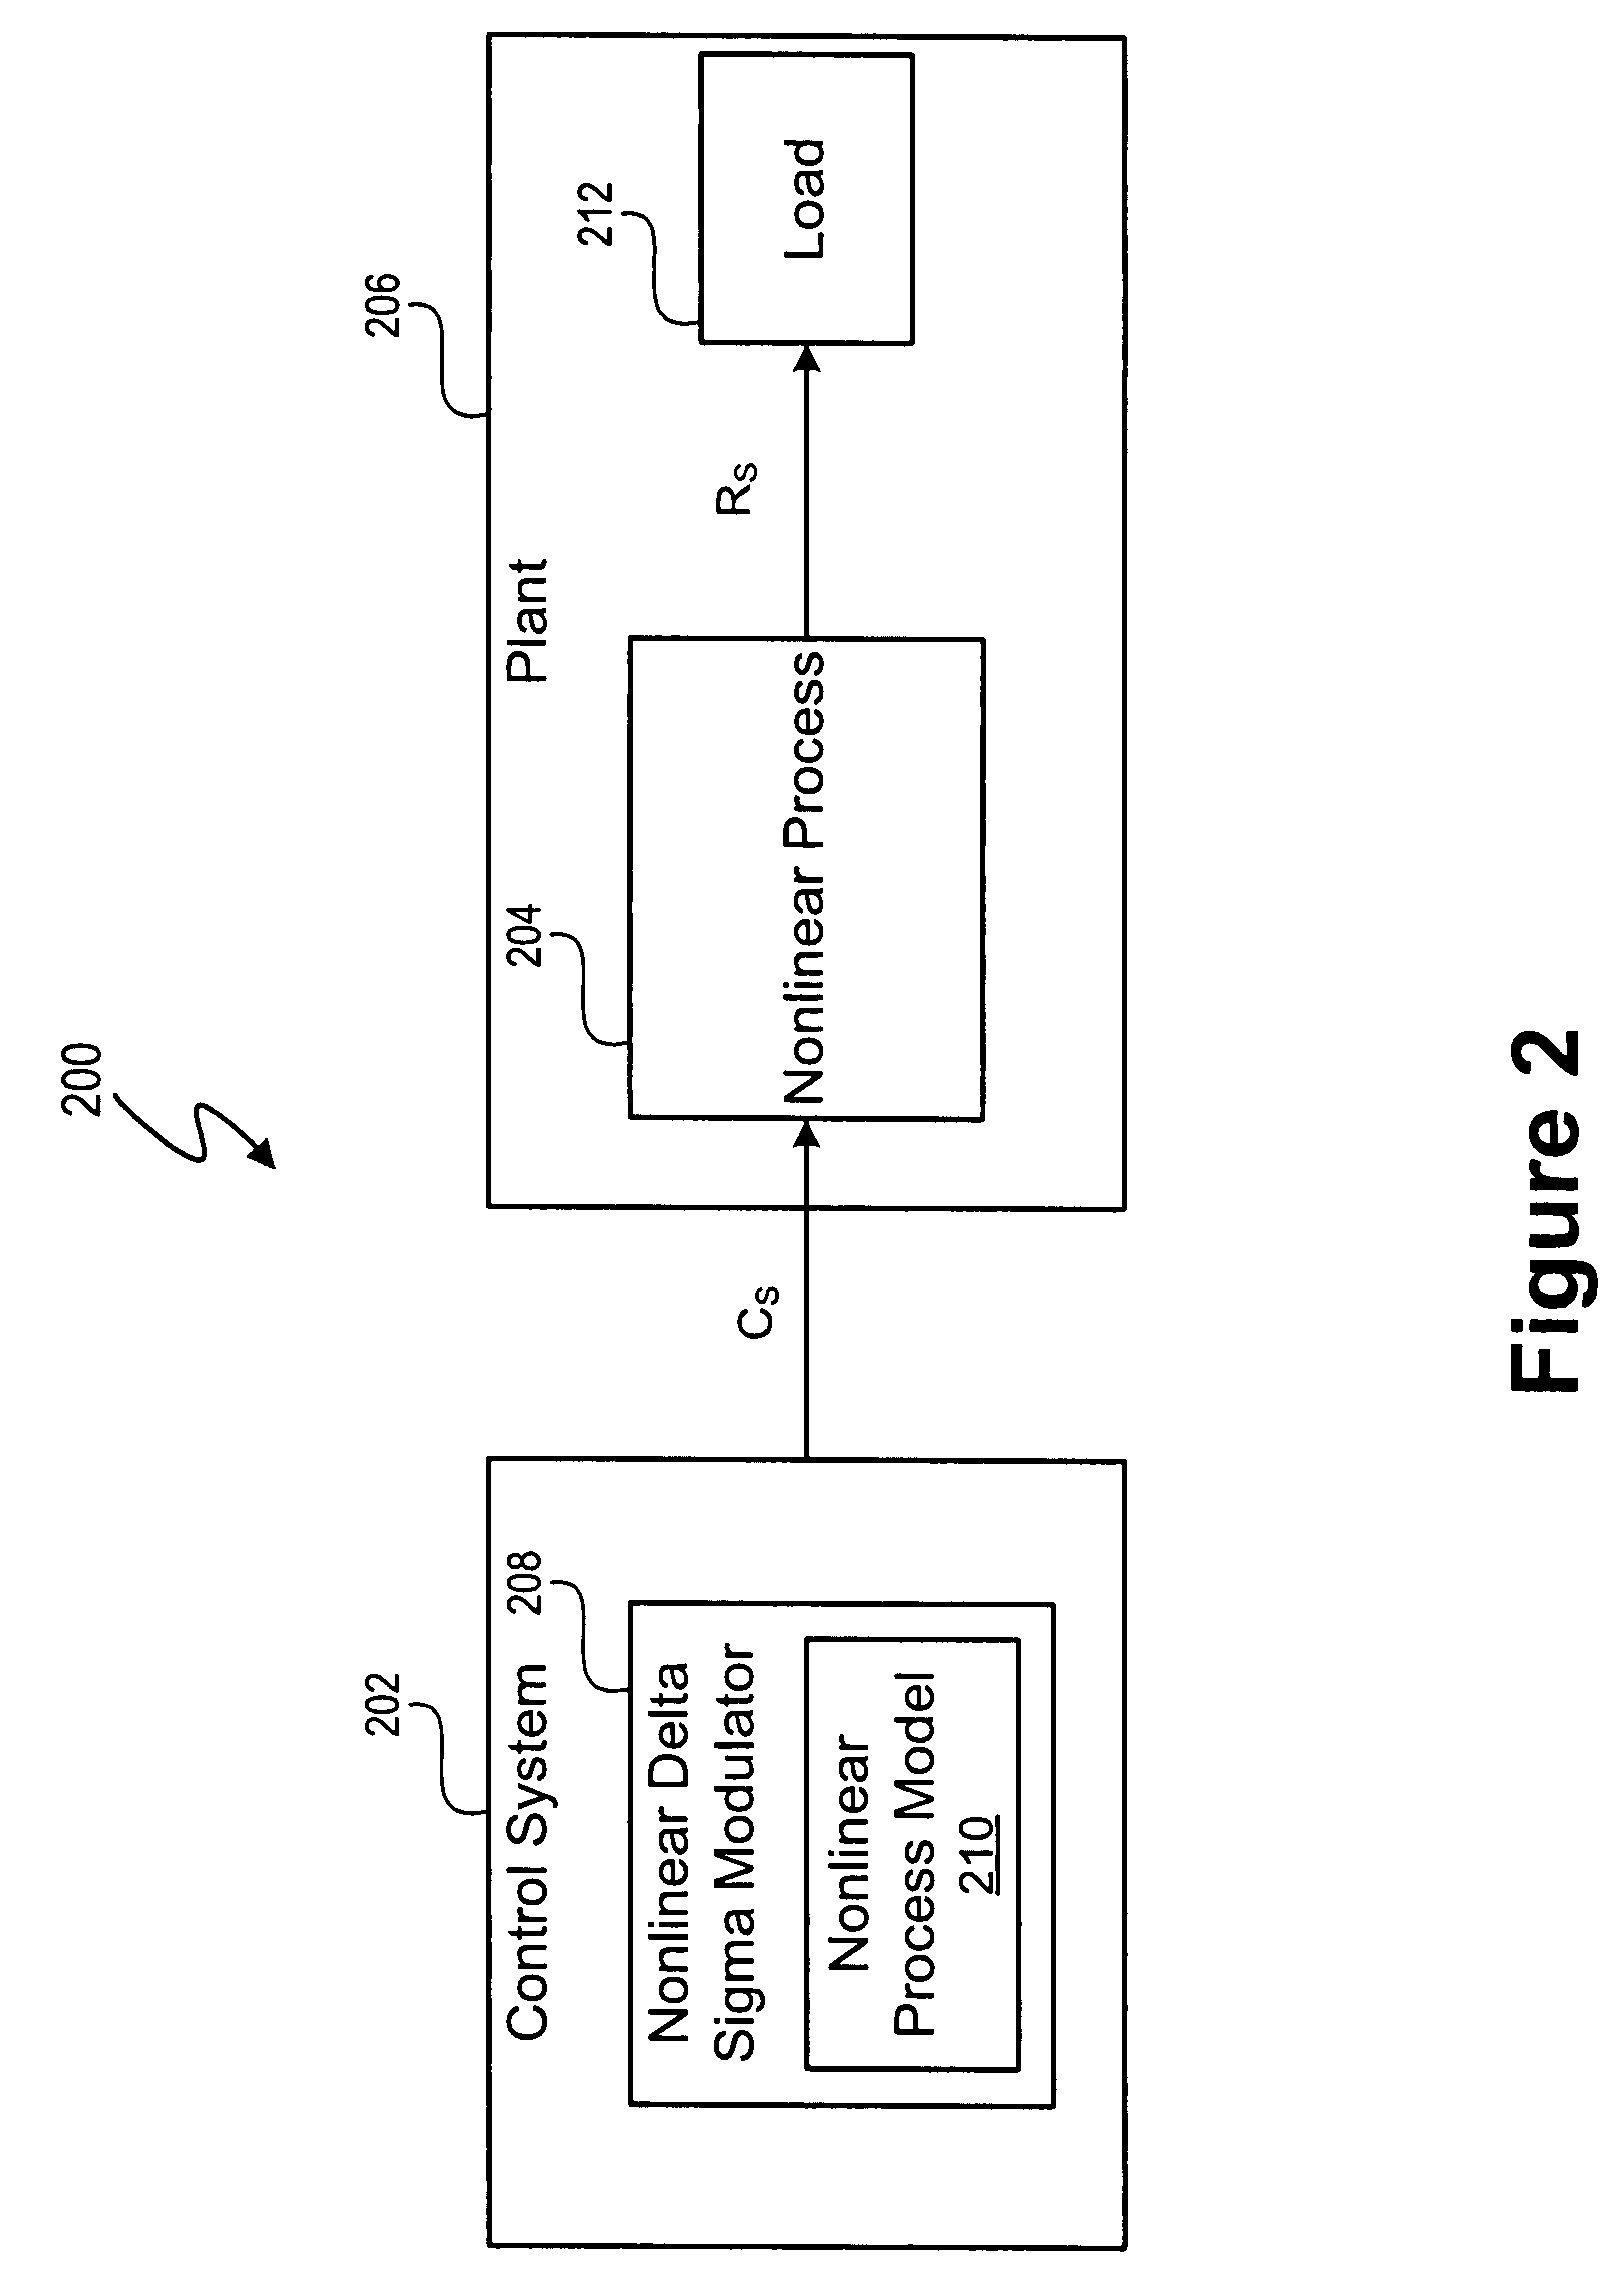 Control system using a nonlinear delta-sigma modulator with nonlinear process modeling